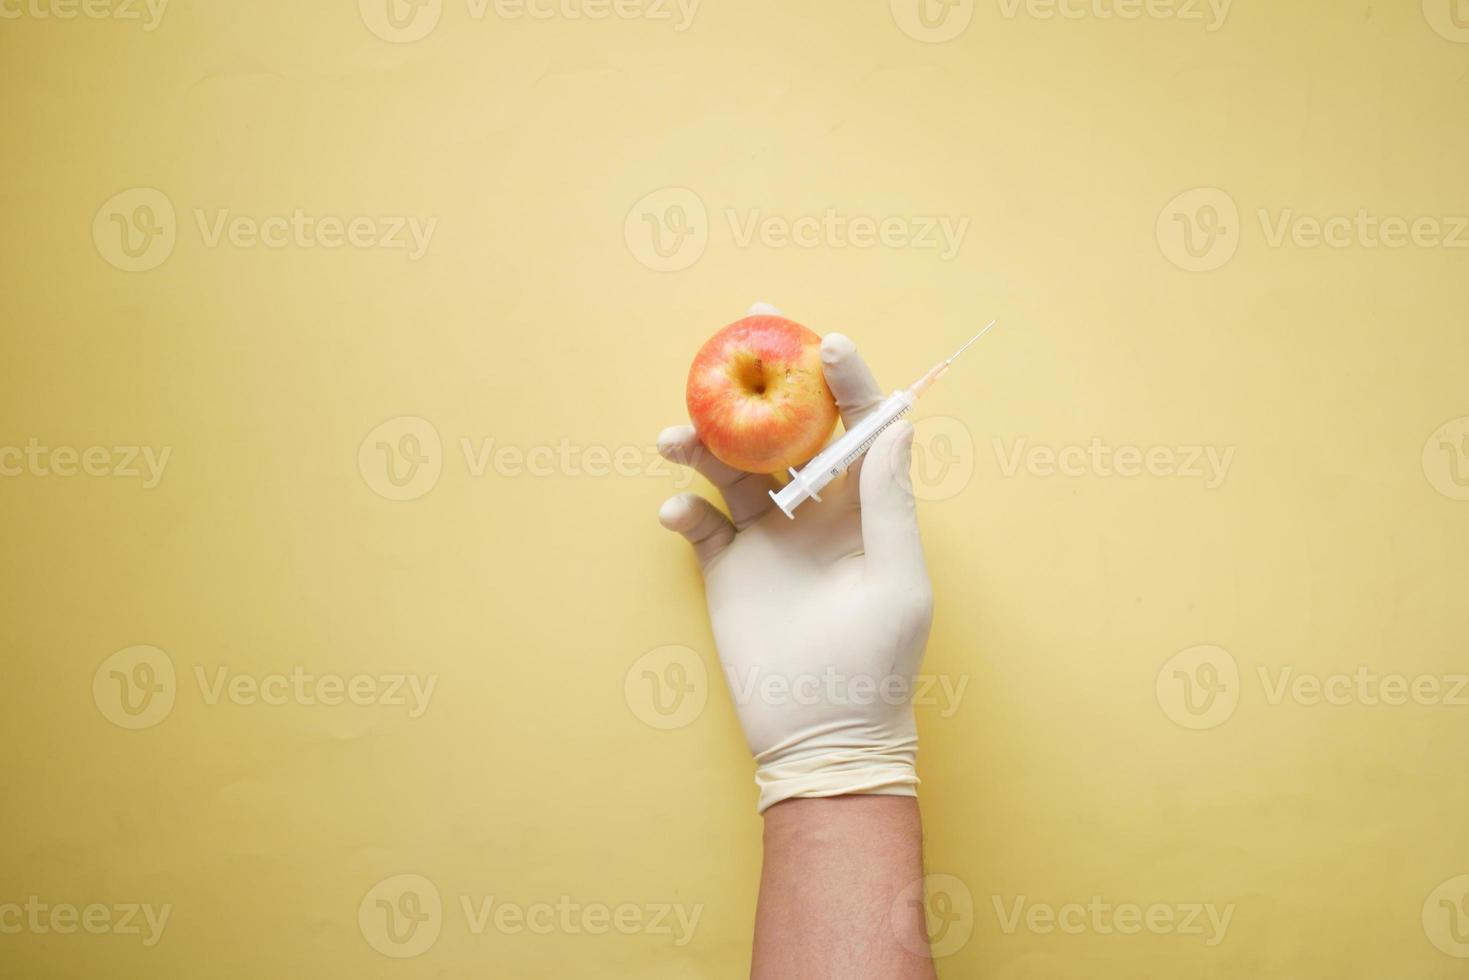 doctor's hand holding green apple on yellow background photo